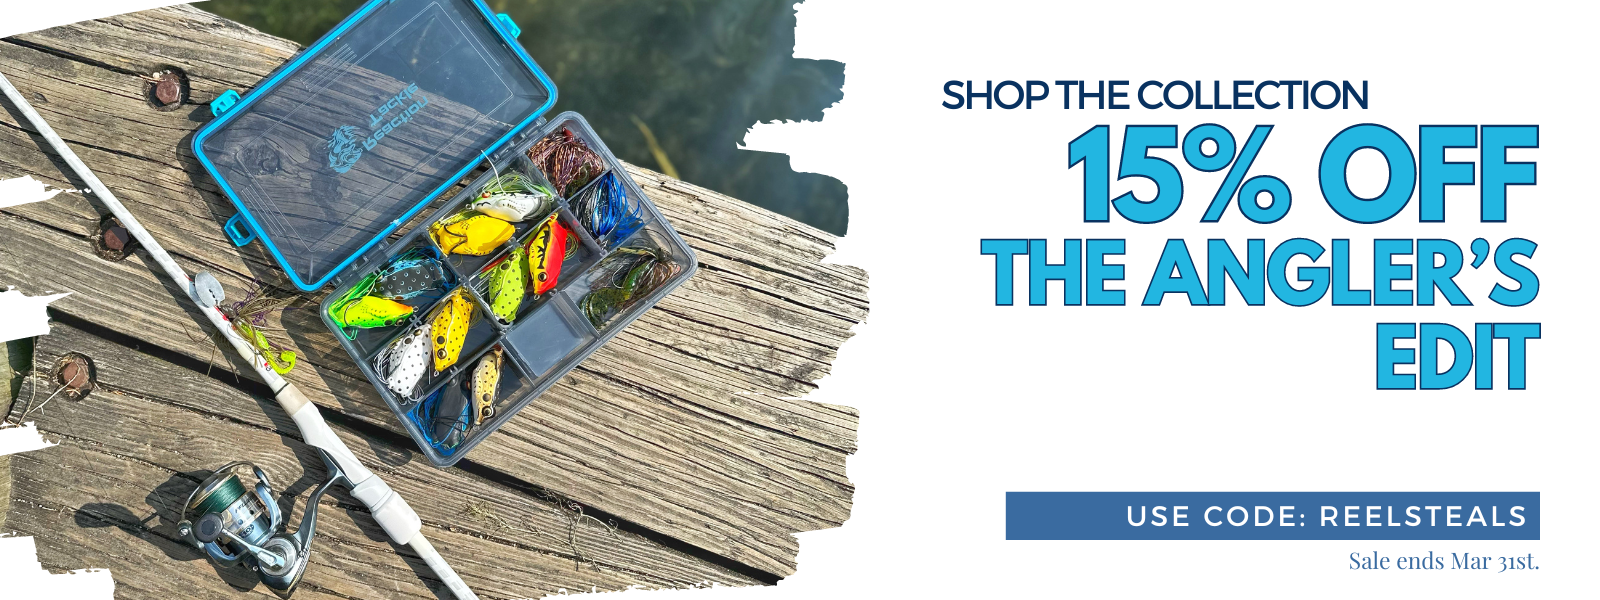 15% Off The Angler’s Edit, use code: REELSTEALS